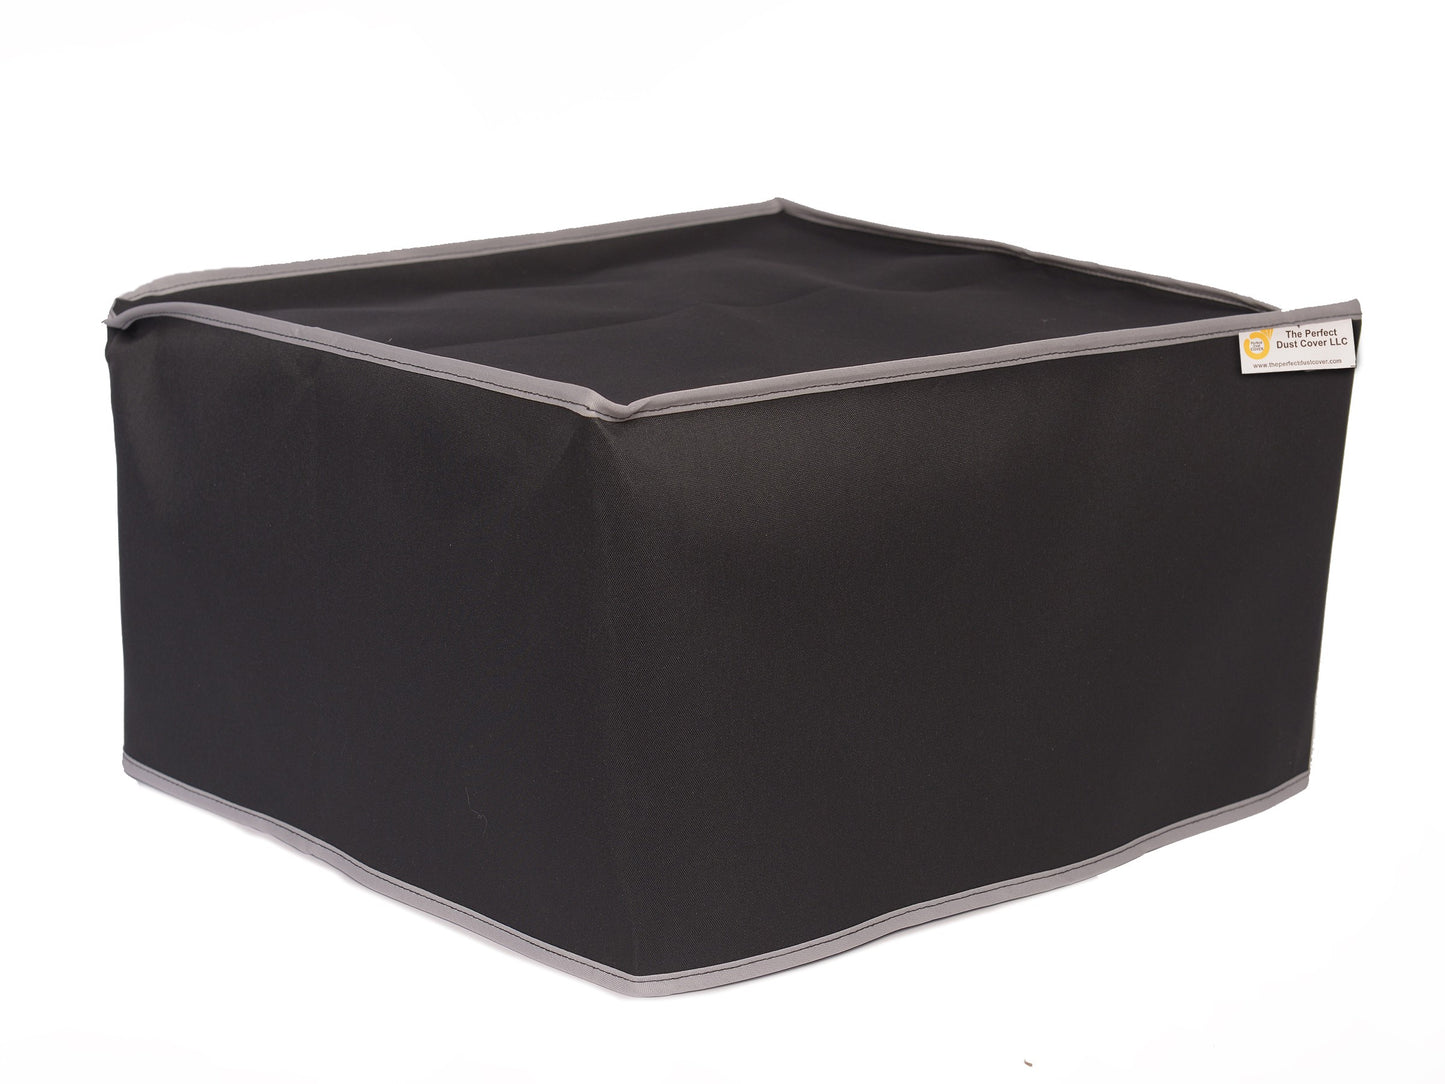 The Perfect Dust Cover, Black Nylon Cover Compatible with Brother MFC-9130CW Color Laser Printer, Anti-Static, Double Stitched and Waterproof Dust Cover by The Perfect Dust Cover LLC